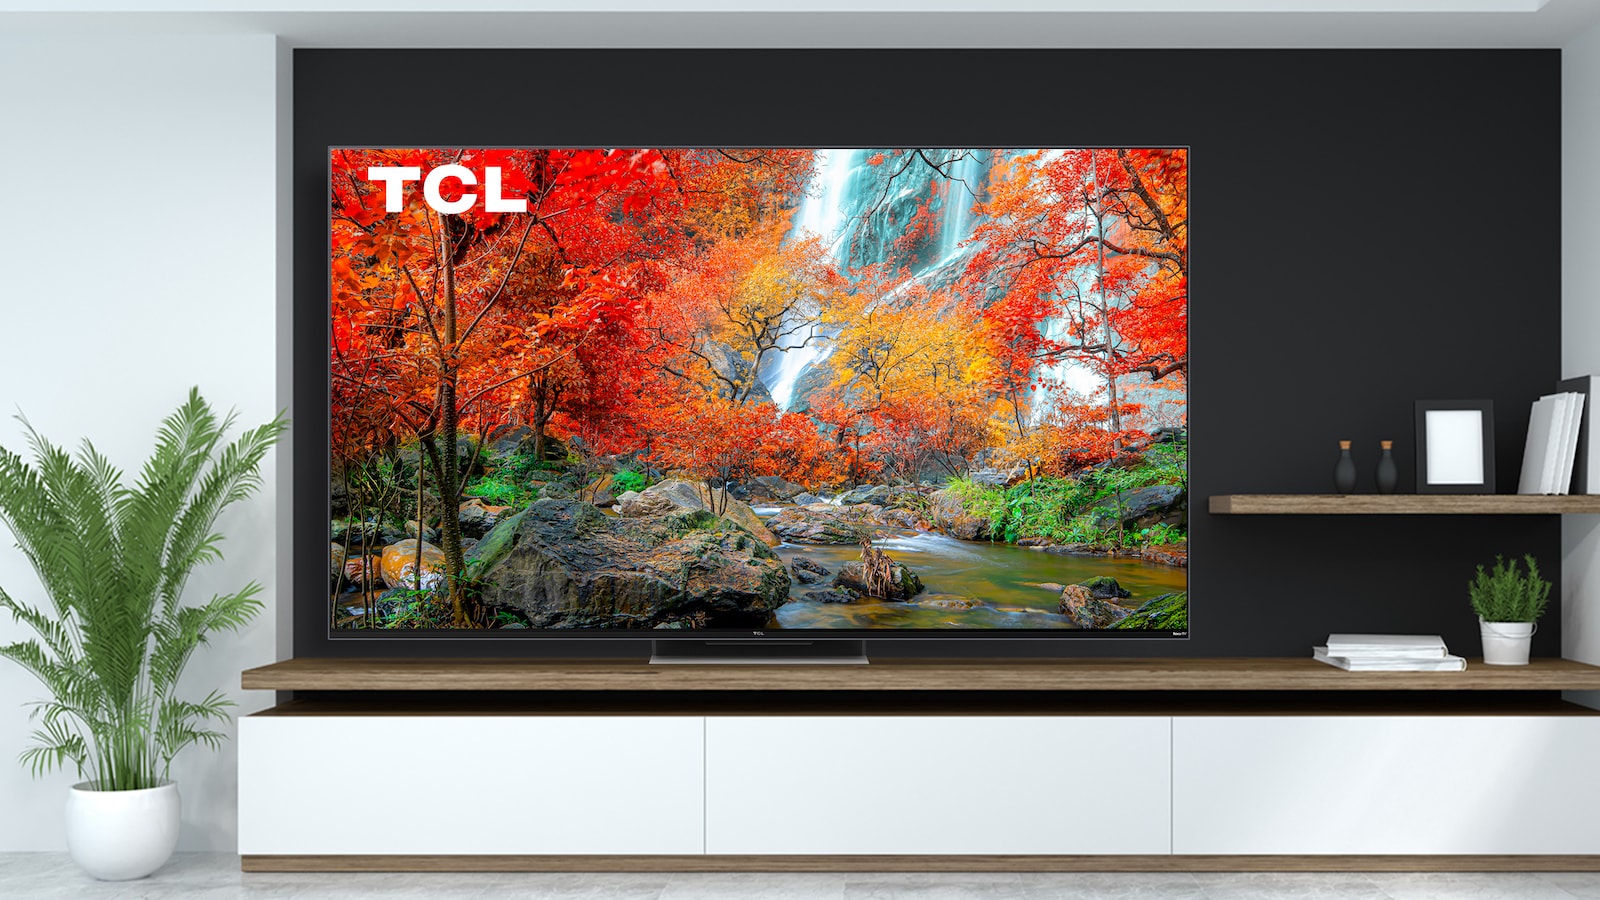 How to Choose the Right TCL TV for Your Home